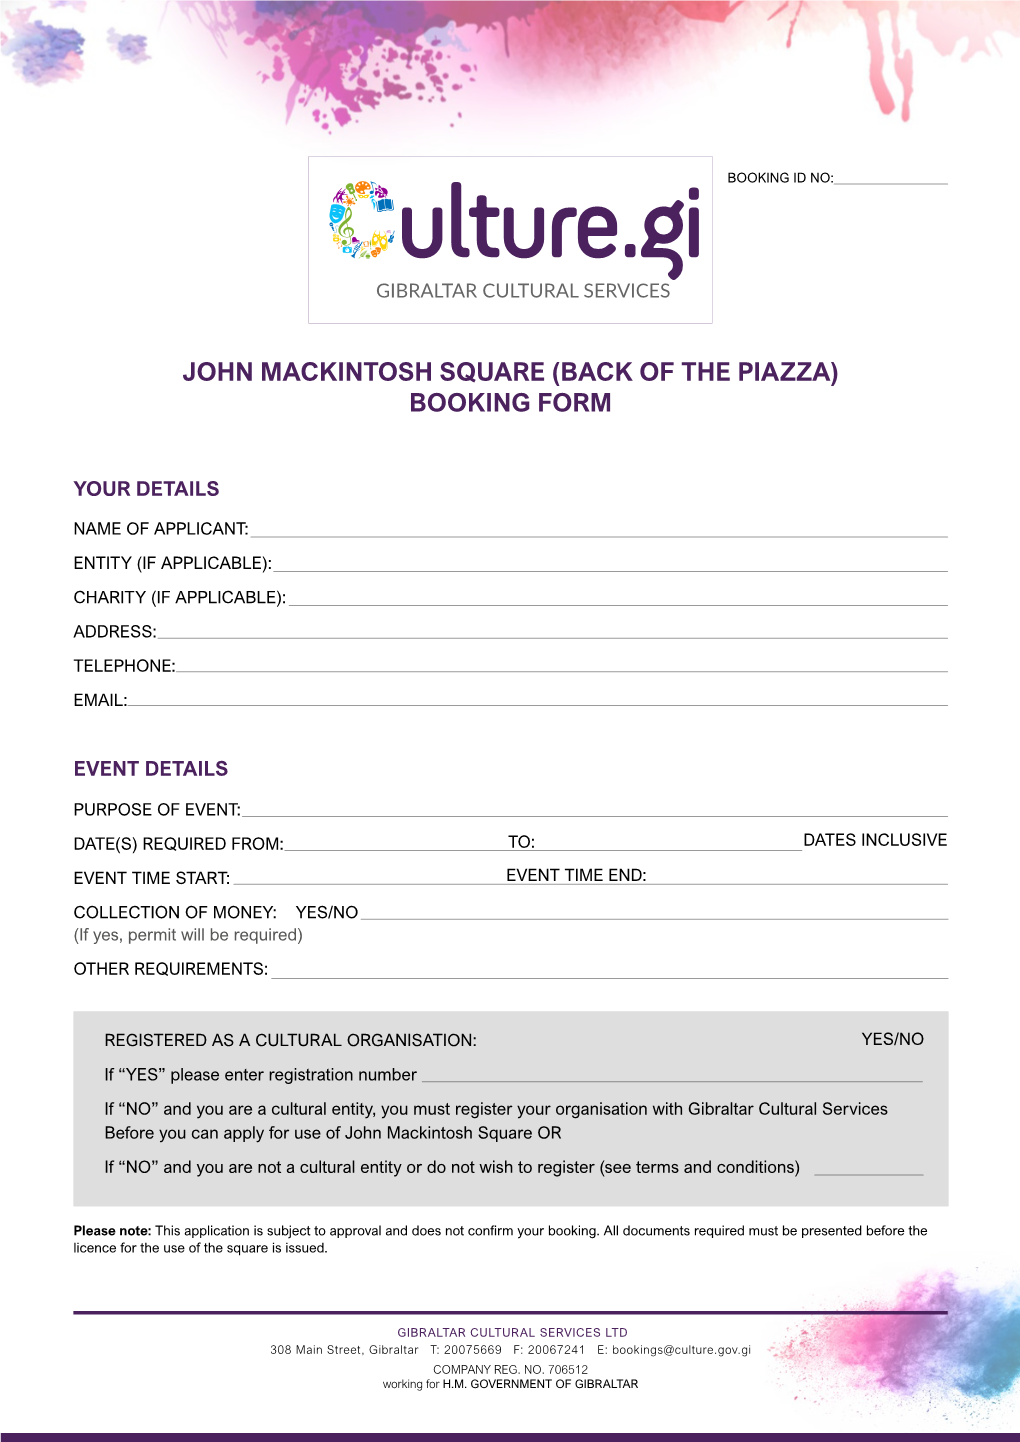 John Mackintosh Square (Back of the Piazza) Booking Form